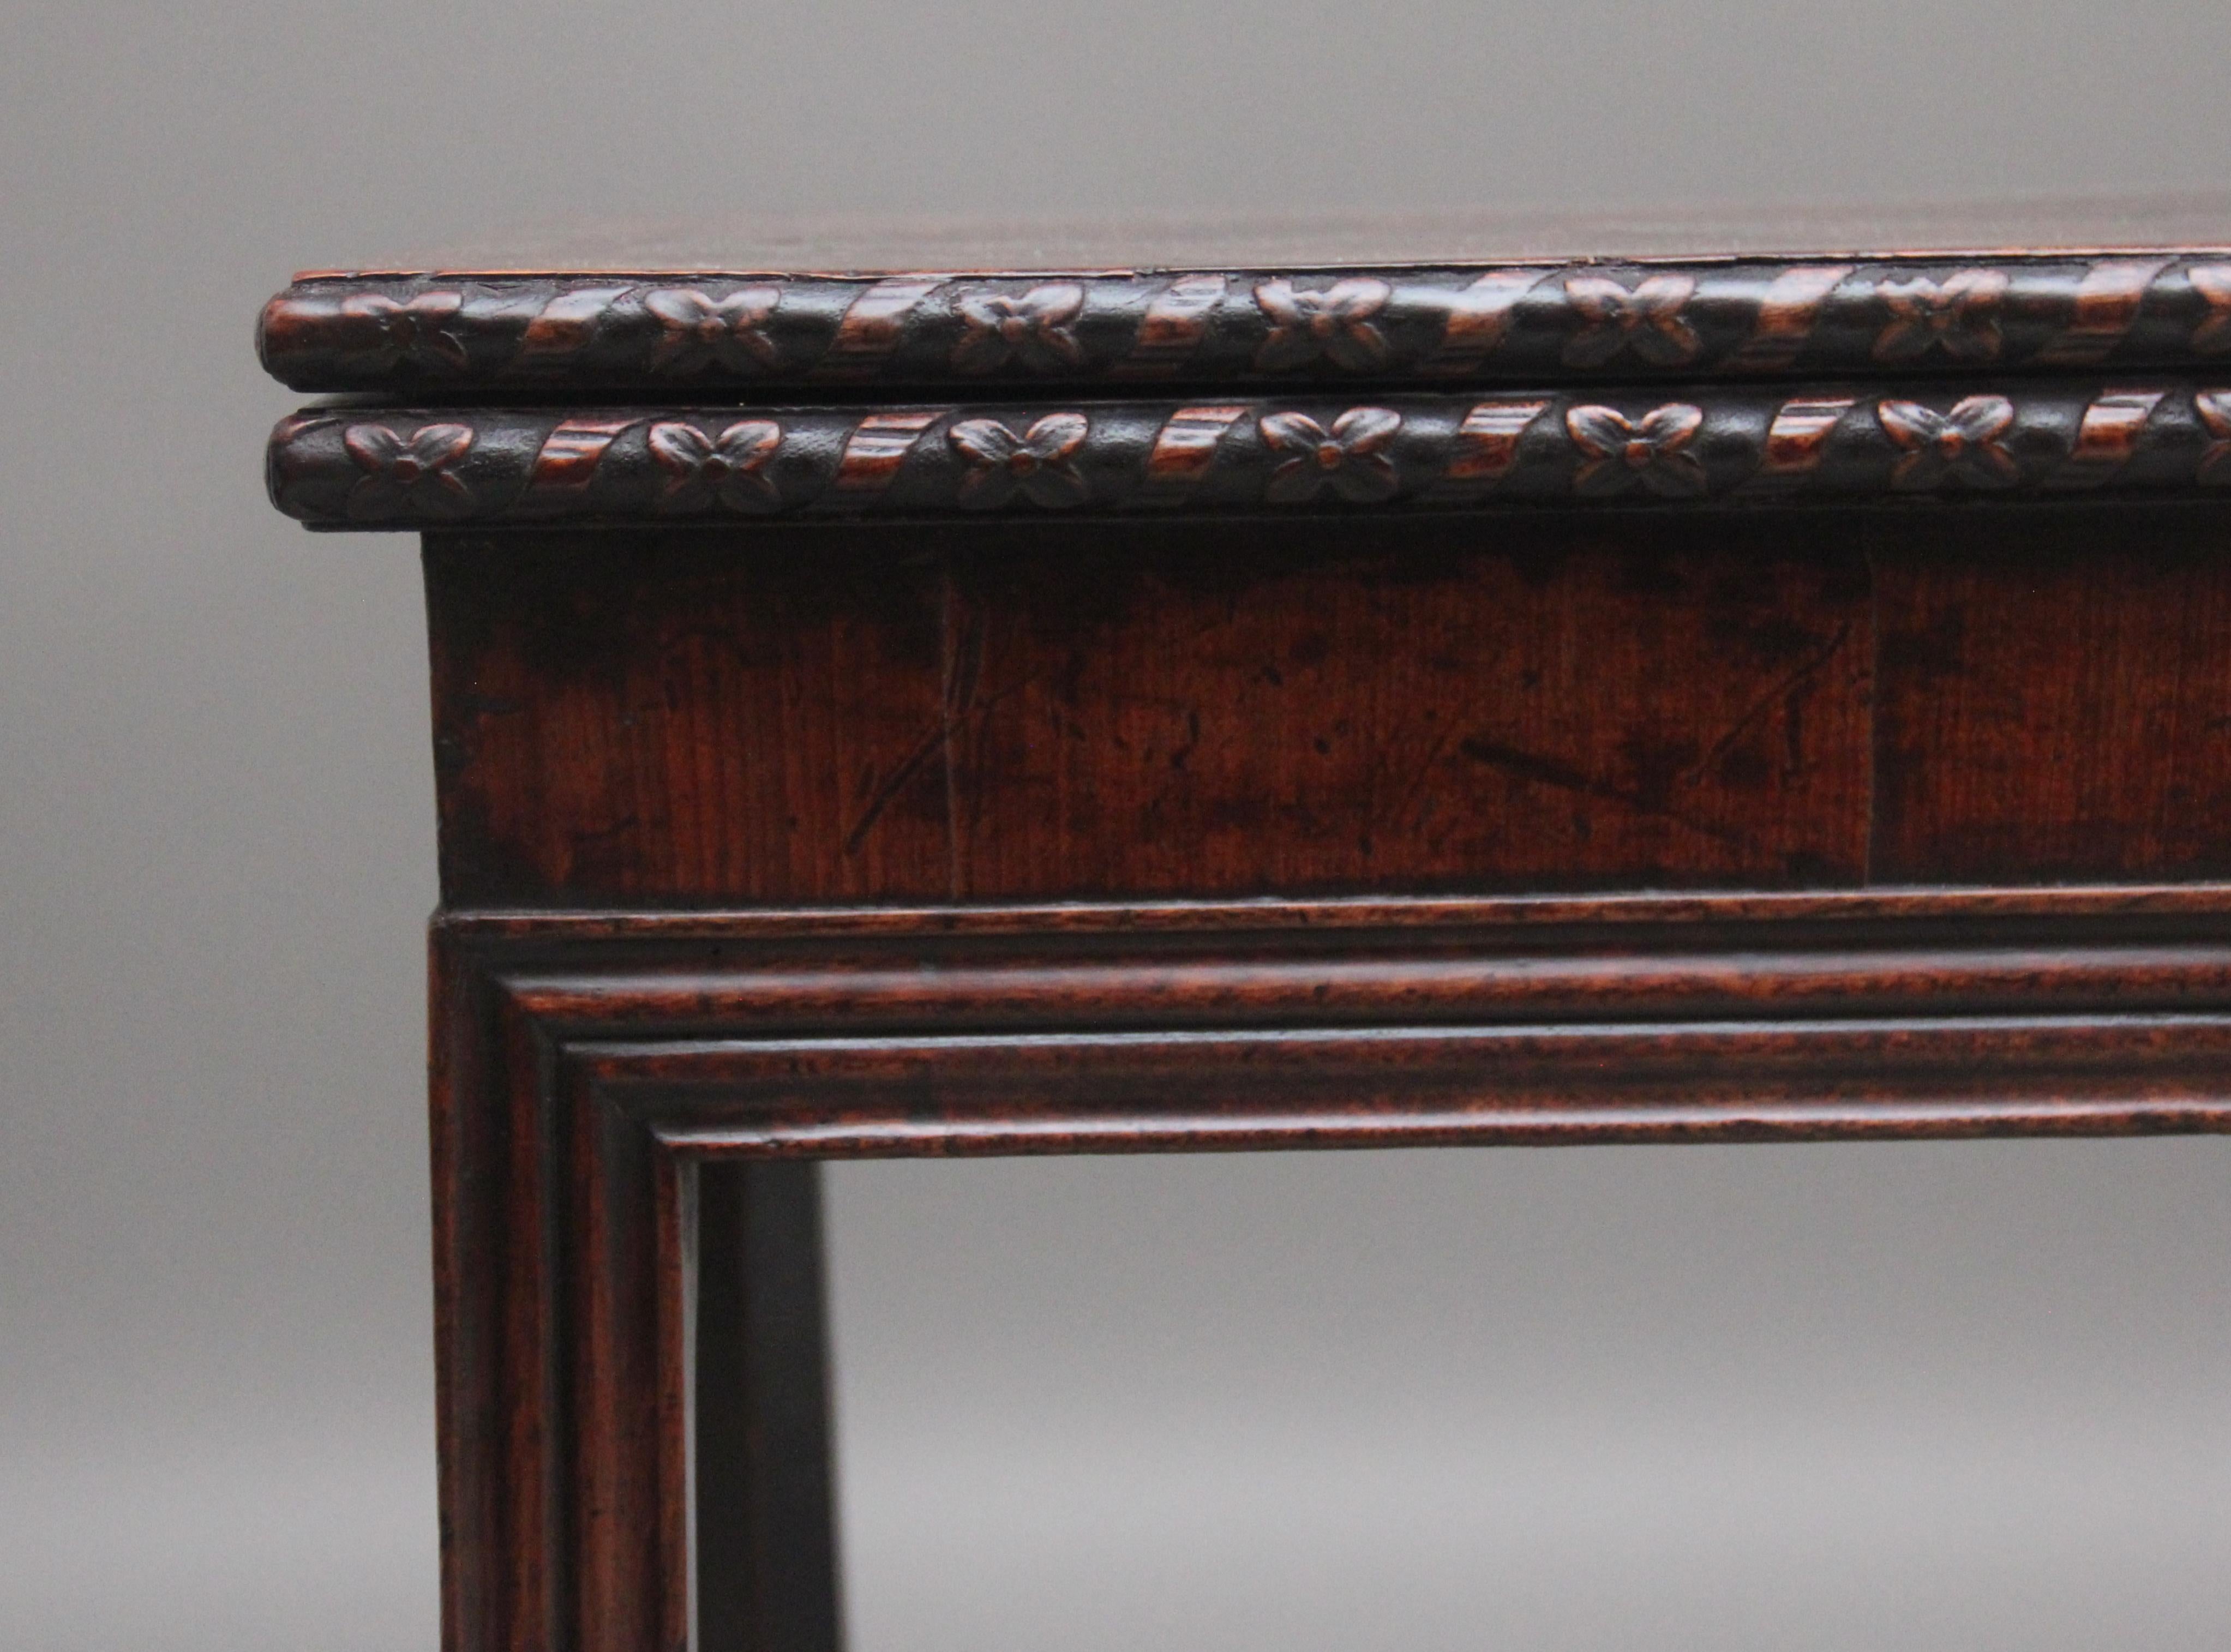 18th Century mahogany card / games table, the rectangular shaped fold over top with a moulded edge with a carved floral decoration, opening to reveal a green baize playing surface, nice figured frieze below and supported on reeded sqaure legs.  The